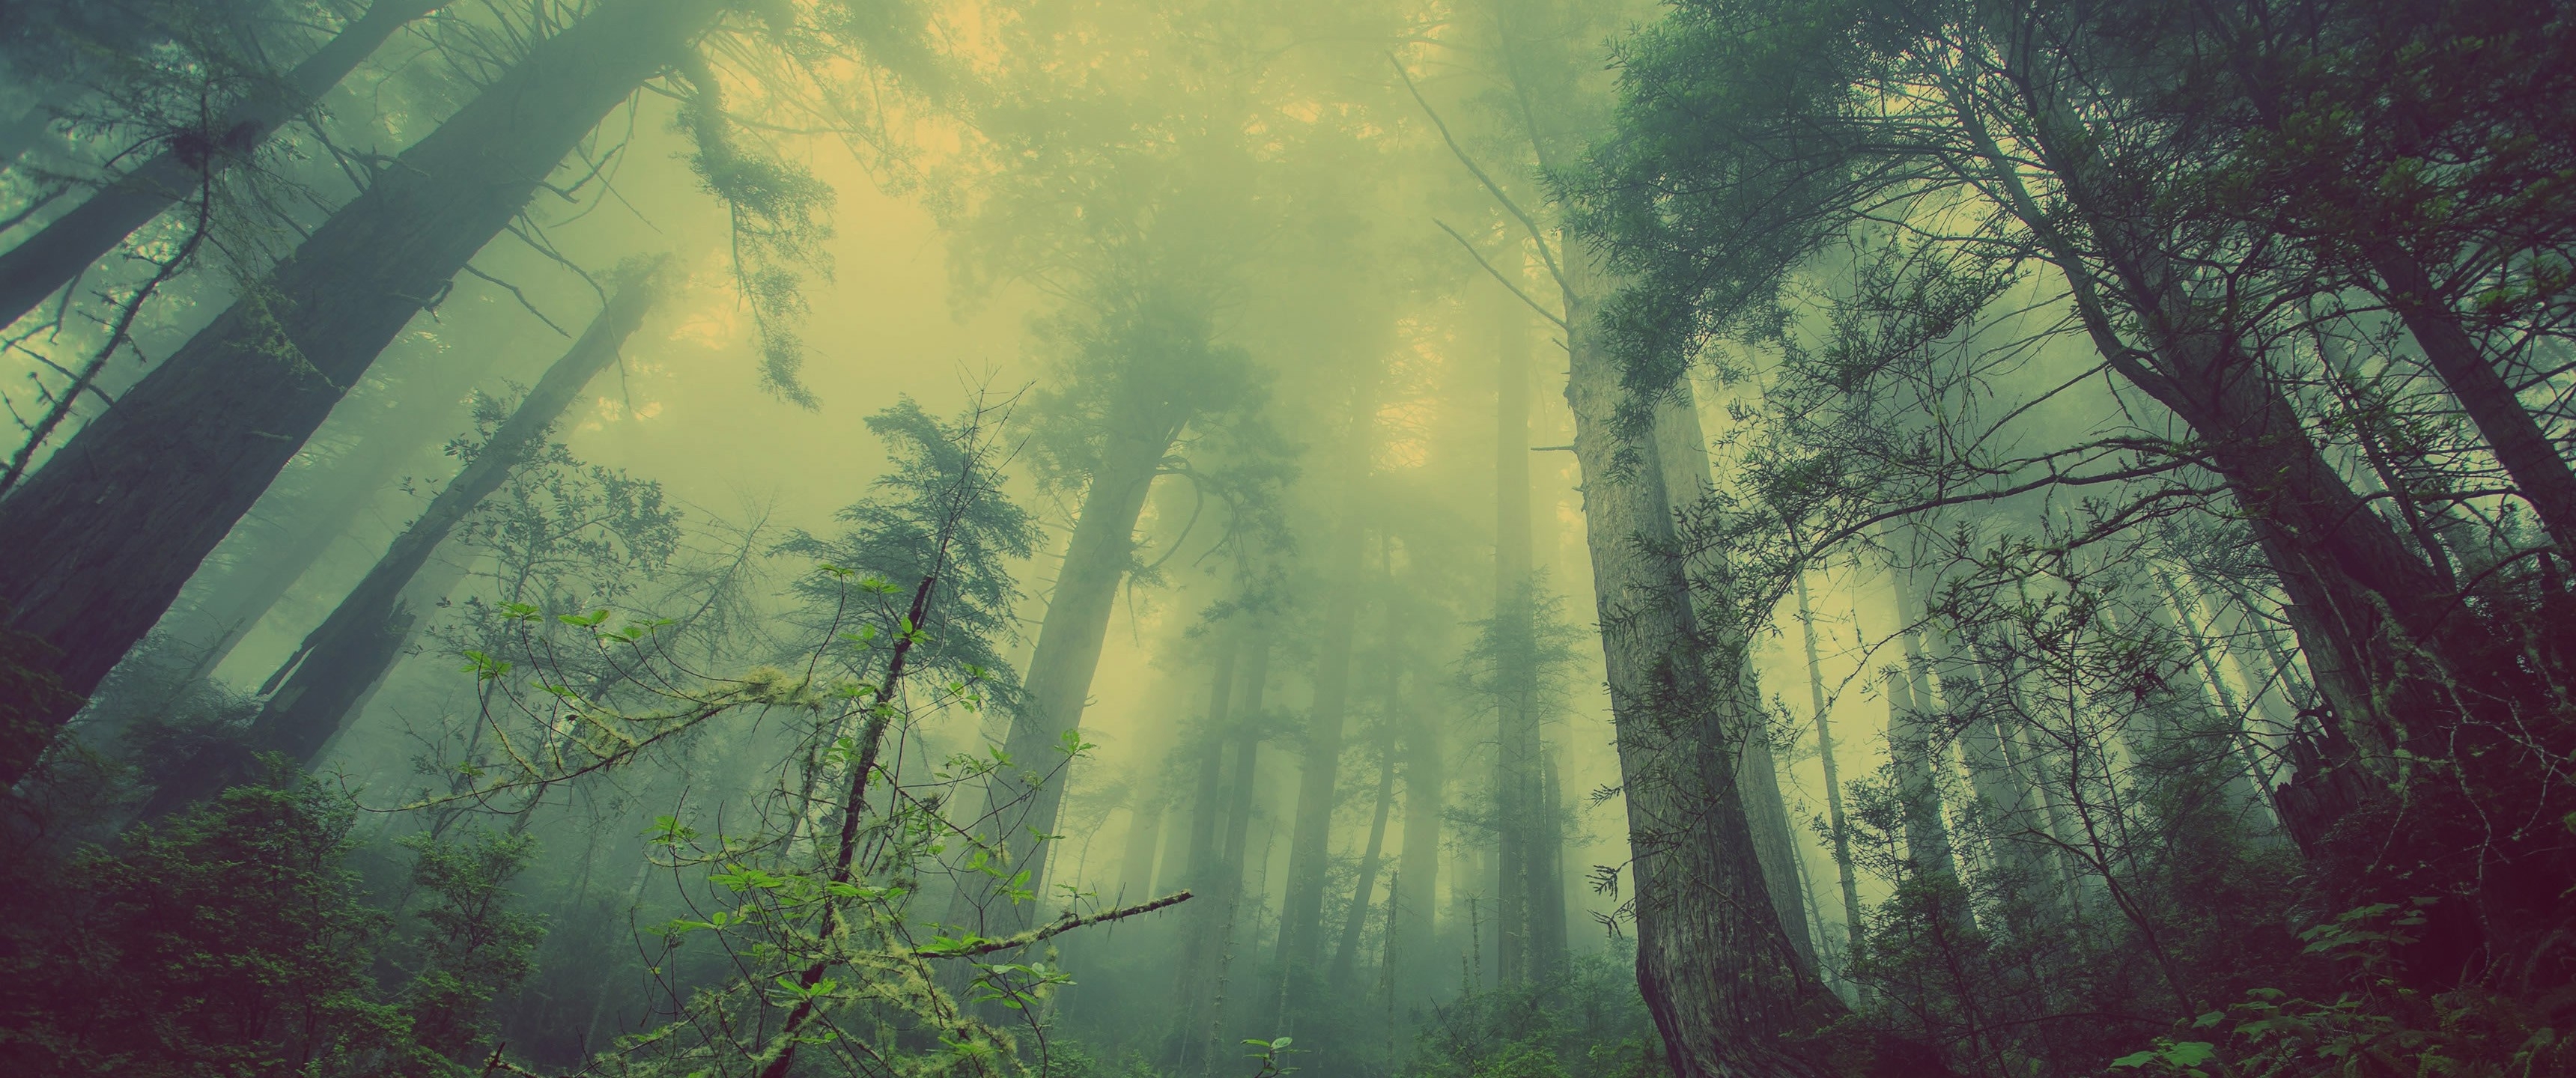 Gloomy misty forest with conifers